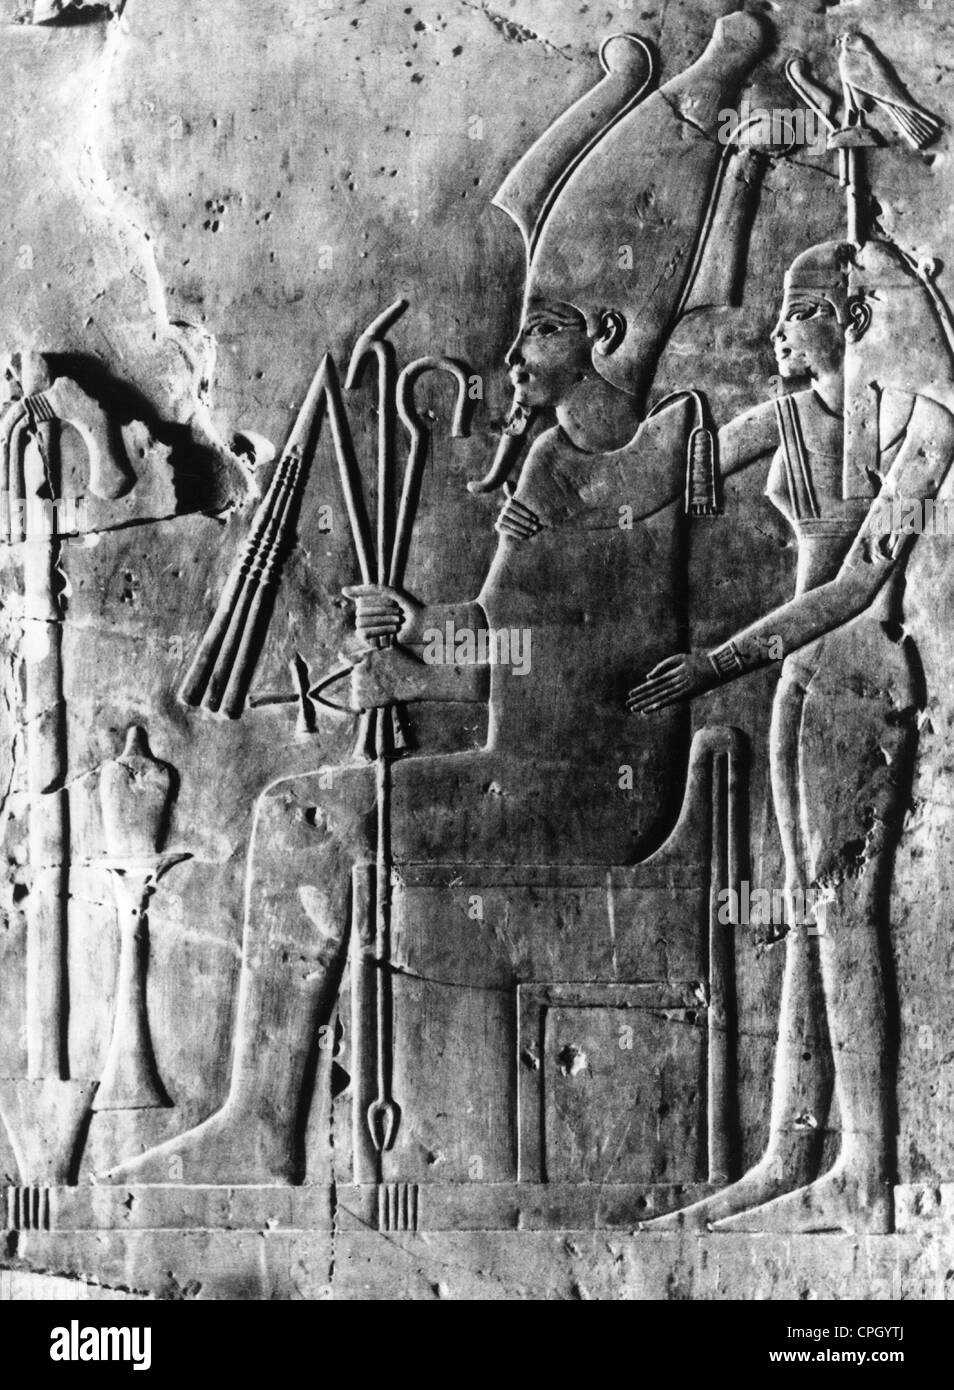 Osiris, Egyptian God, Lord of the realm of the dead, with Imentet, relief from the grave of the Cha-en-het, provost of the barns under Amenhotep III ( 1411 - 1375 BC), Stock Photo